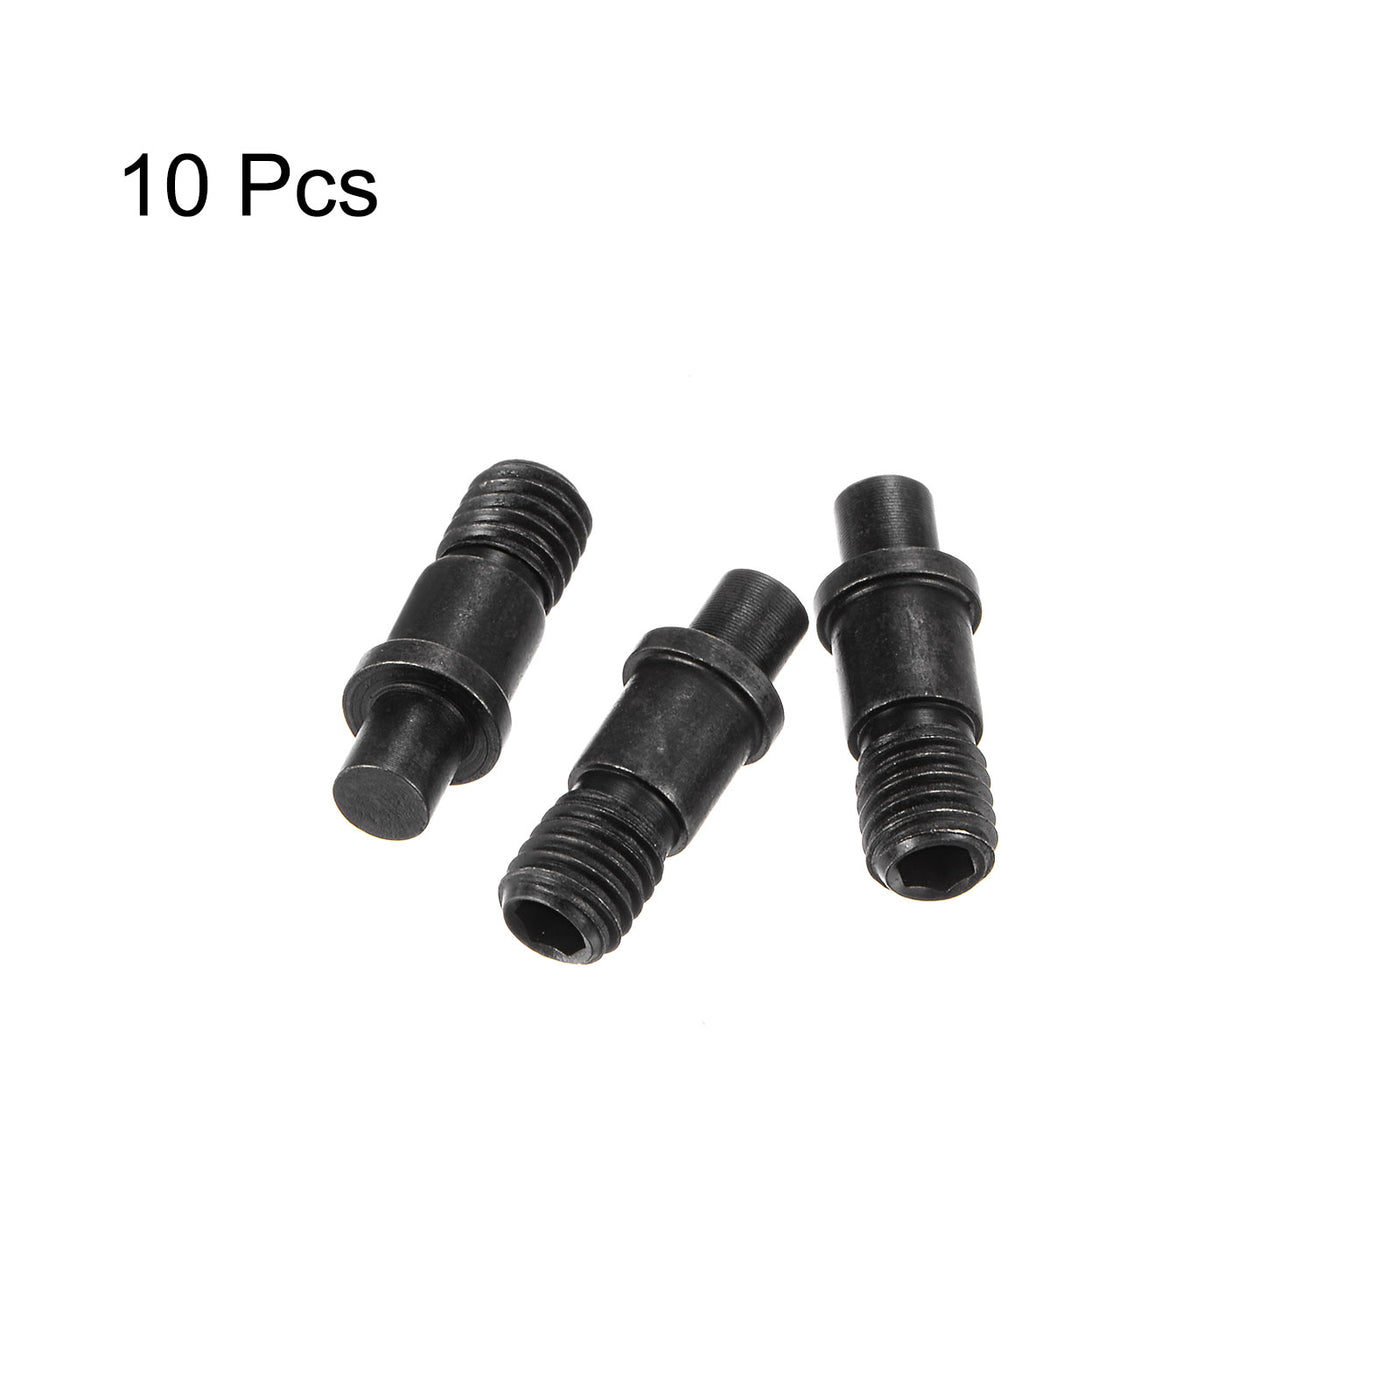 Uxcell Uxcell M5x15.5-0.8 Set Screws for Carbide Insert CNC Lathe Turning Tool Holder, 10Pcs